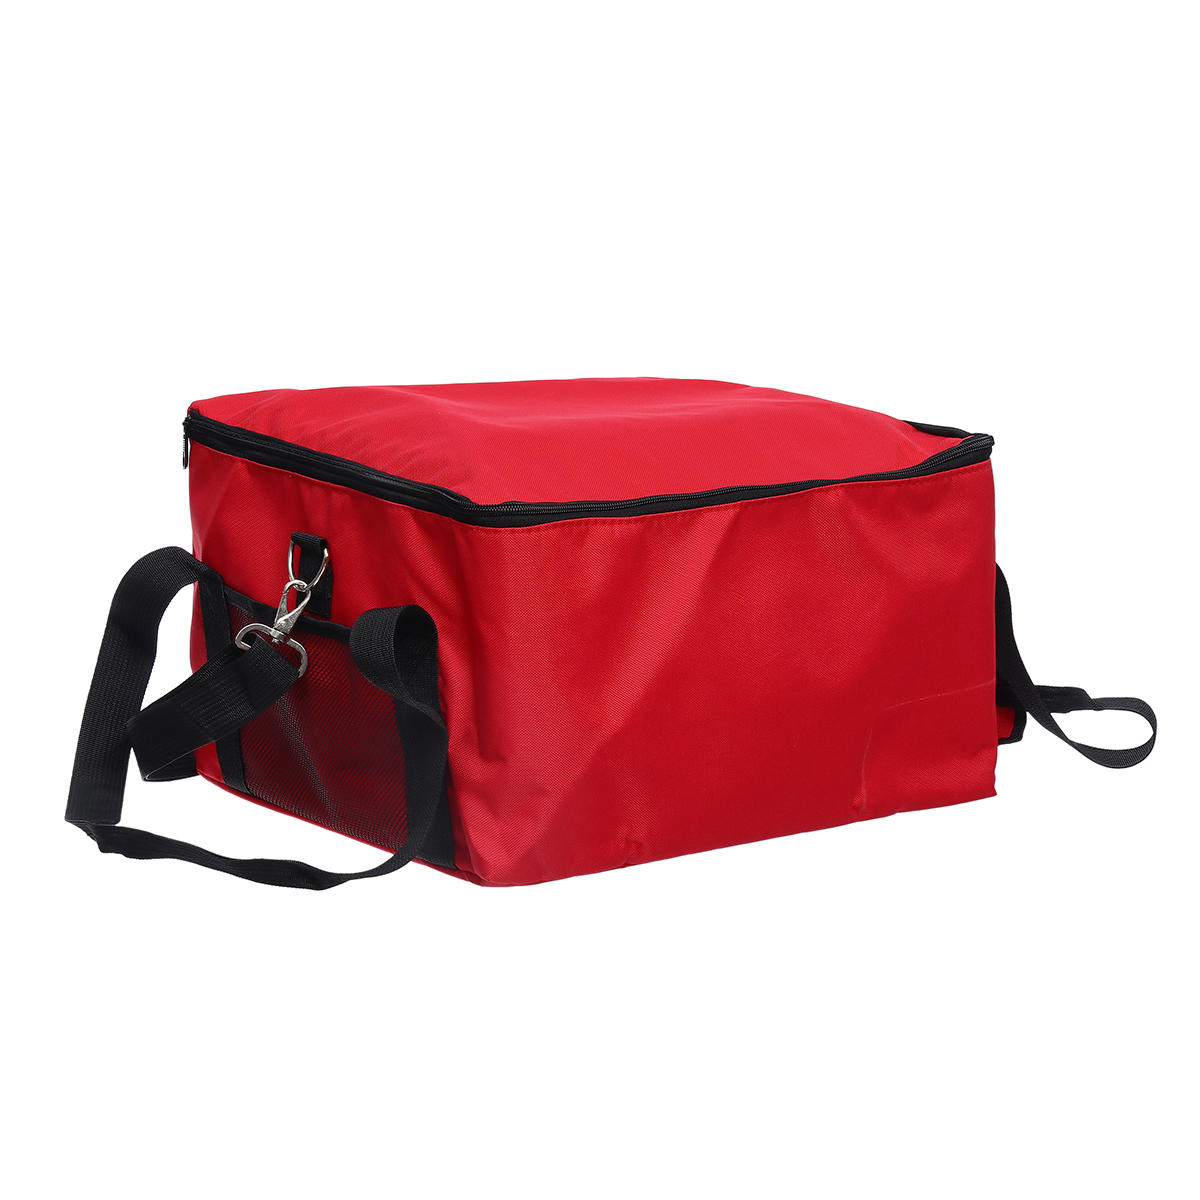 Thermal Insulated Lunch Bag Outdoor Camping Traveling Picnic Bag Food Storage Bag Pizza Delivery Bag